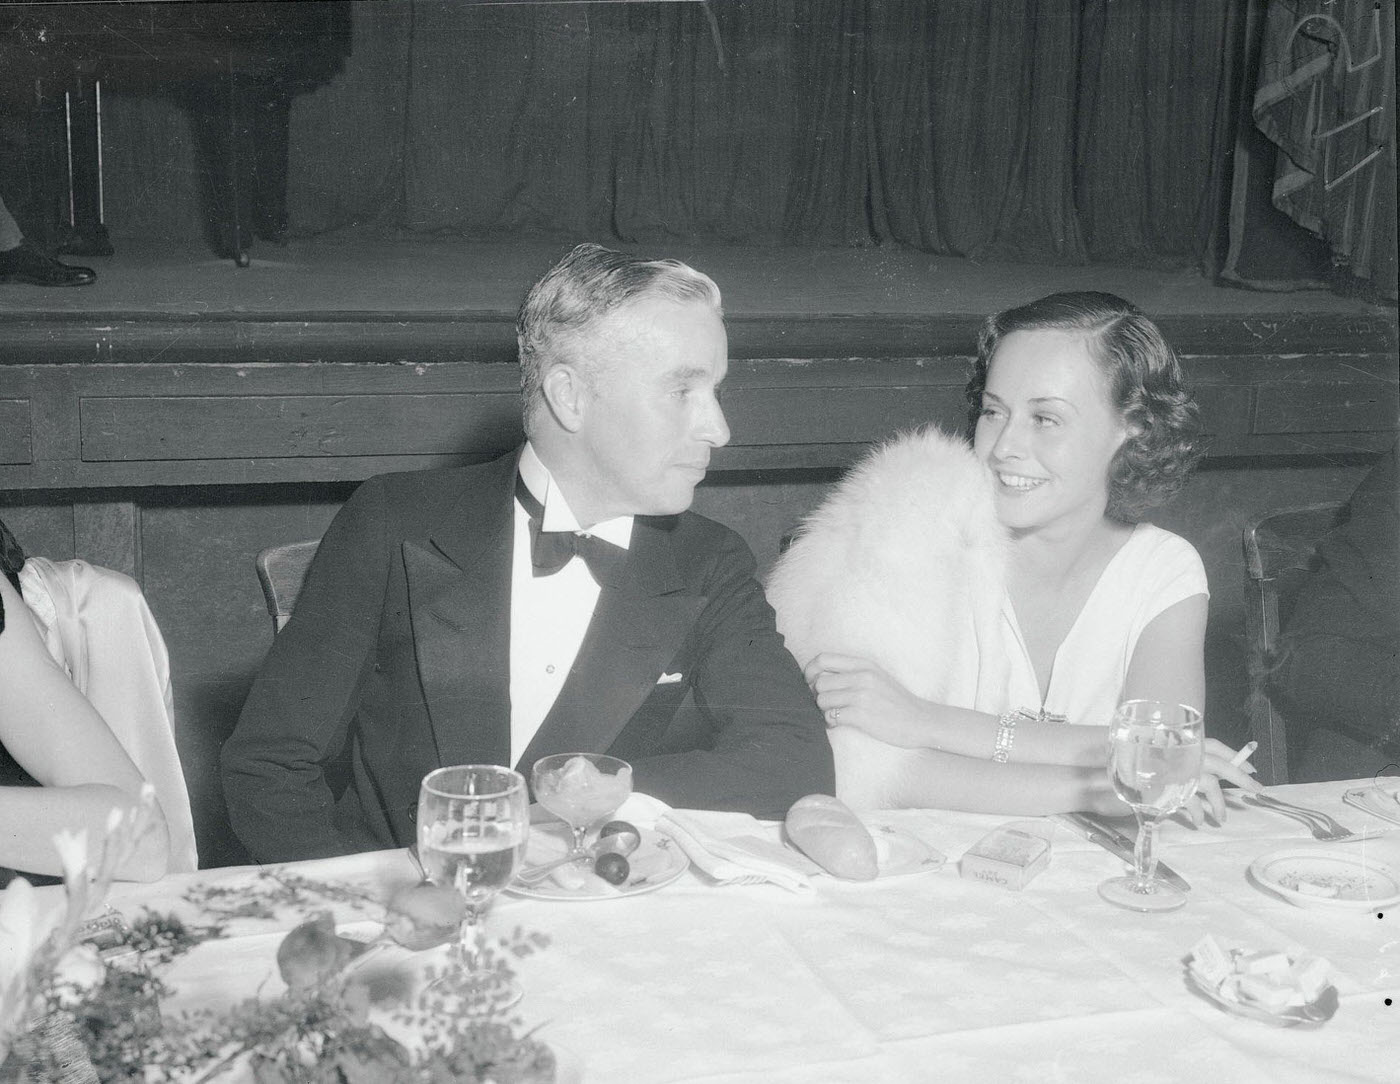 Charlie Chaplin and Paulette Goddard enjoy their little joke as they attend the party given in honor of Walt Disney